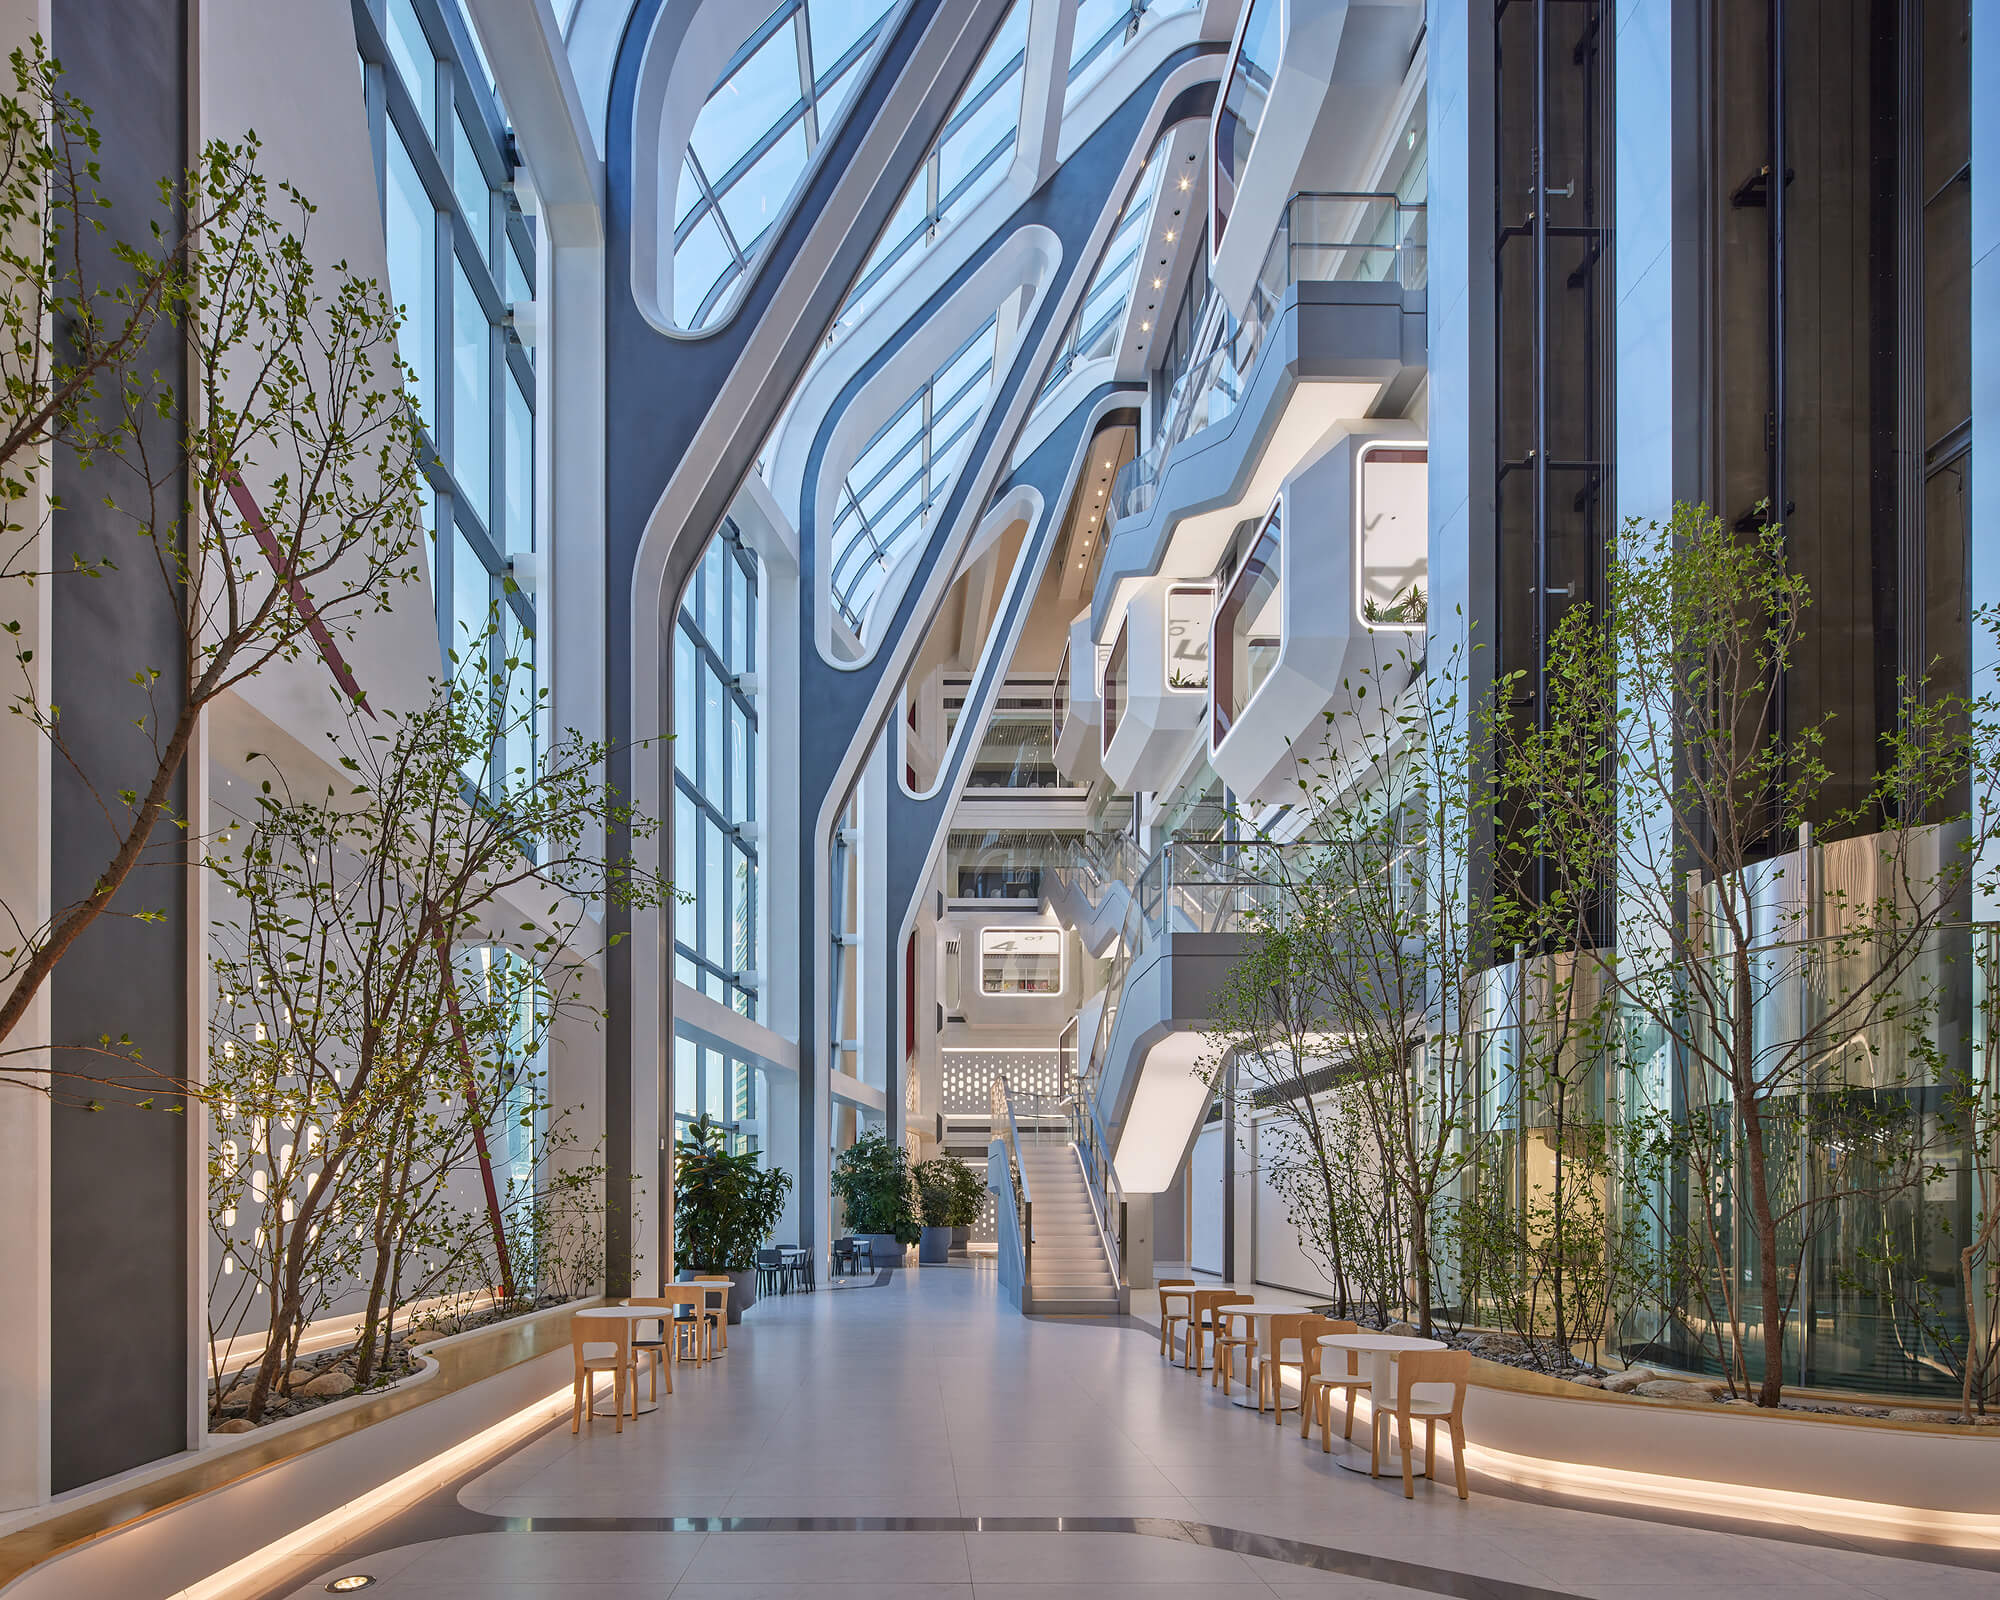 the inner garden allows the light to enter all parts of the office